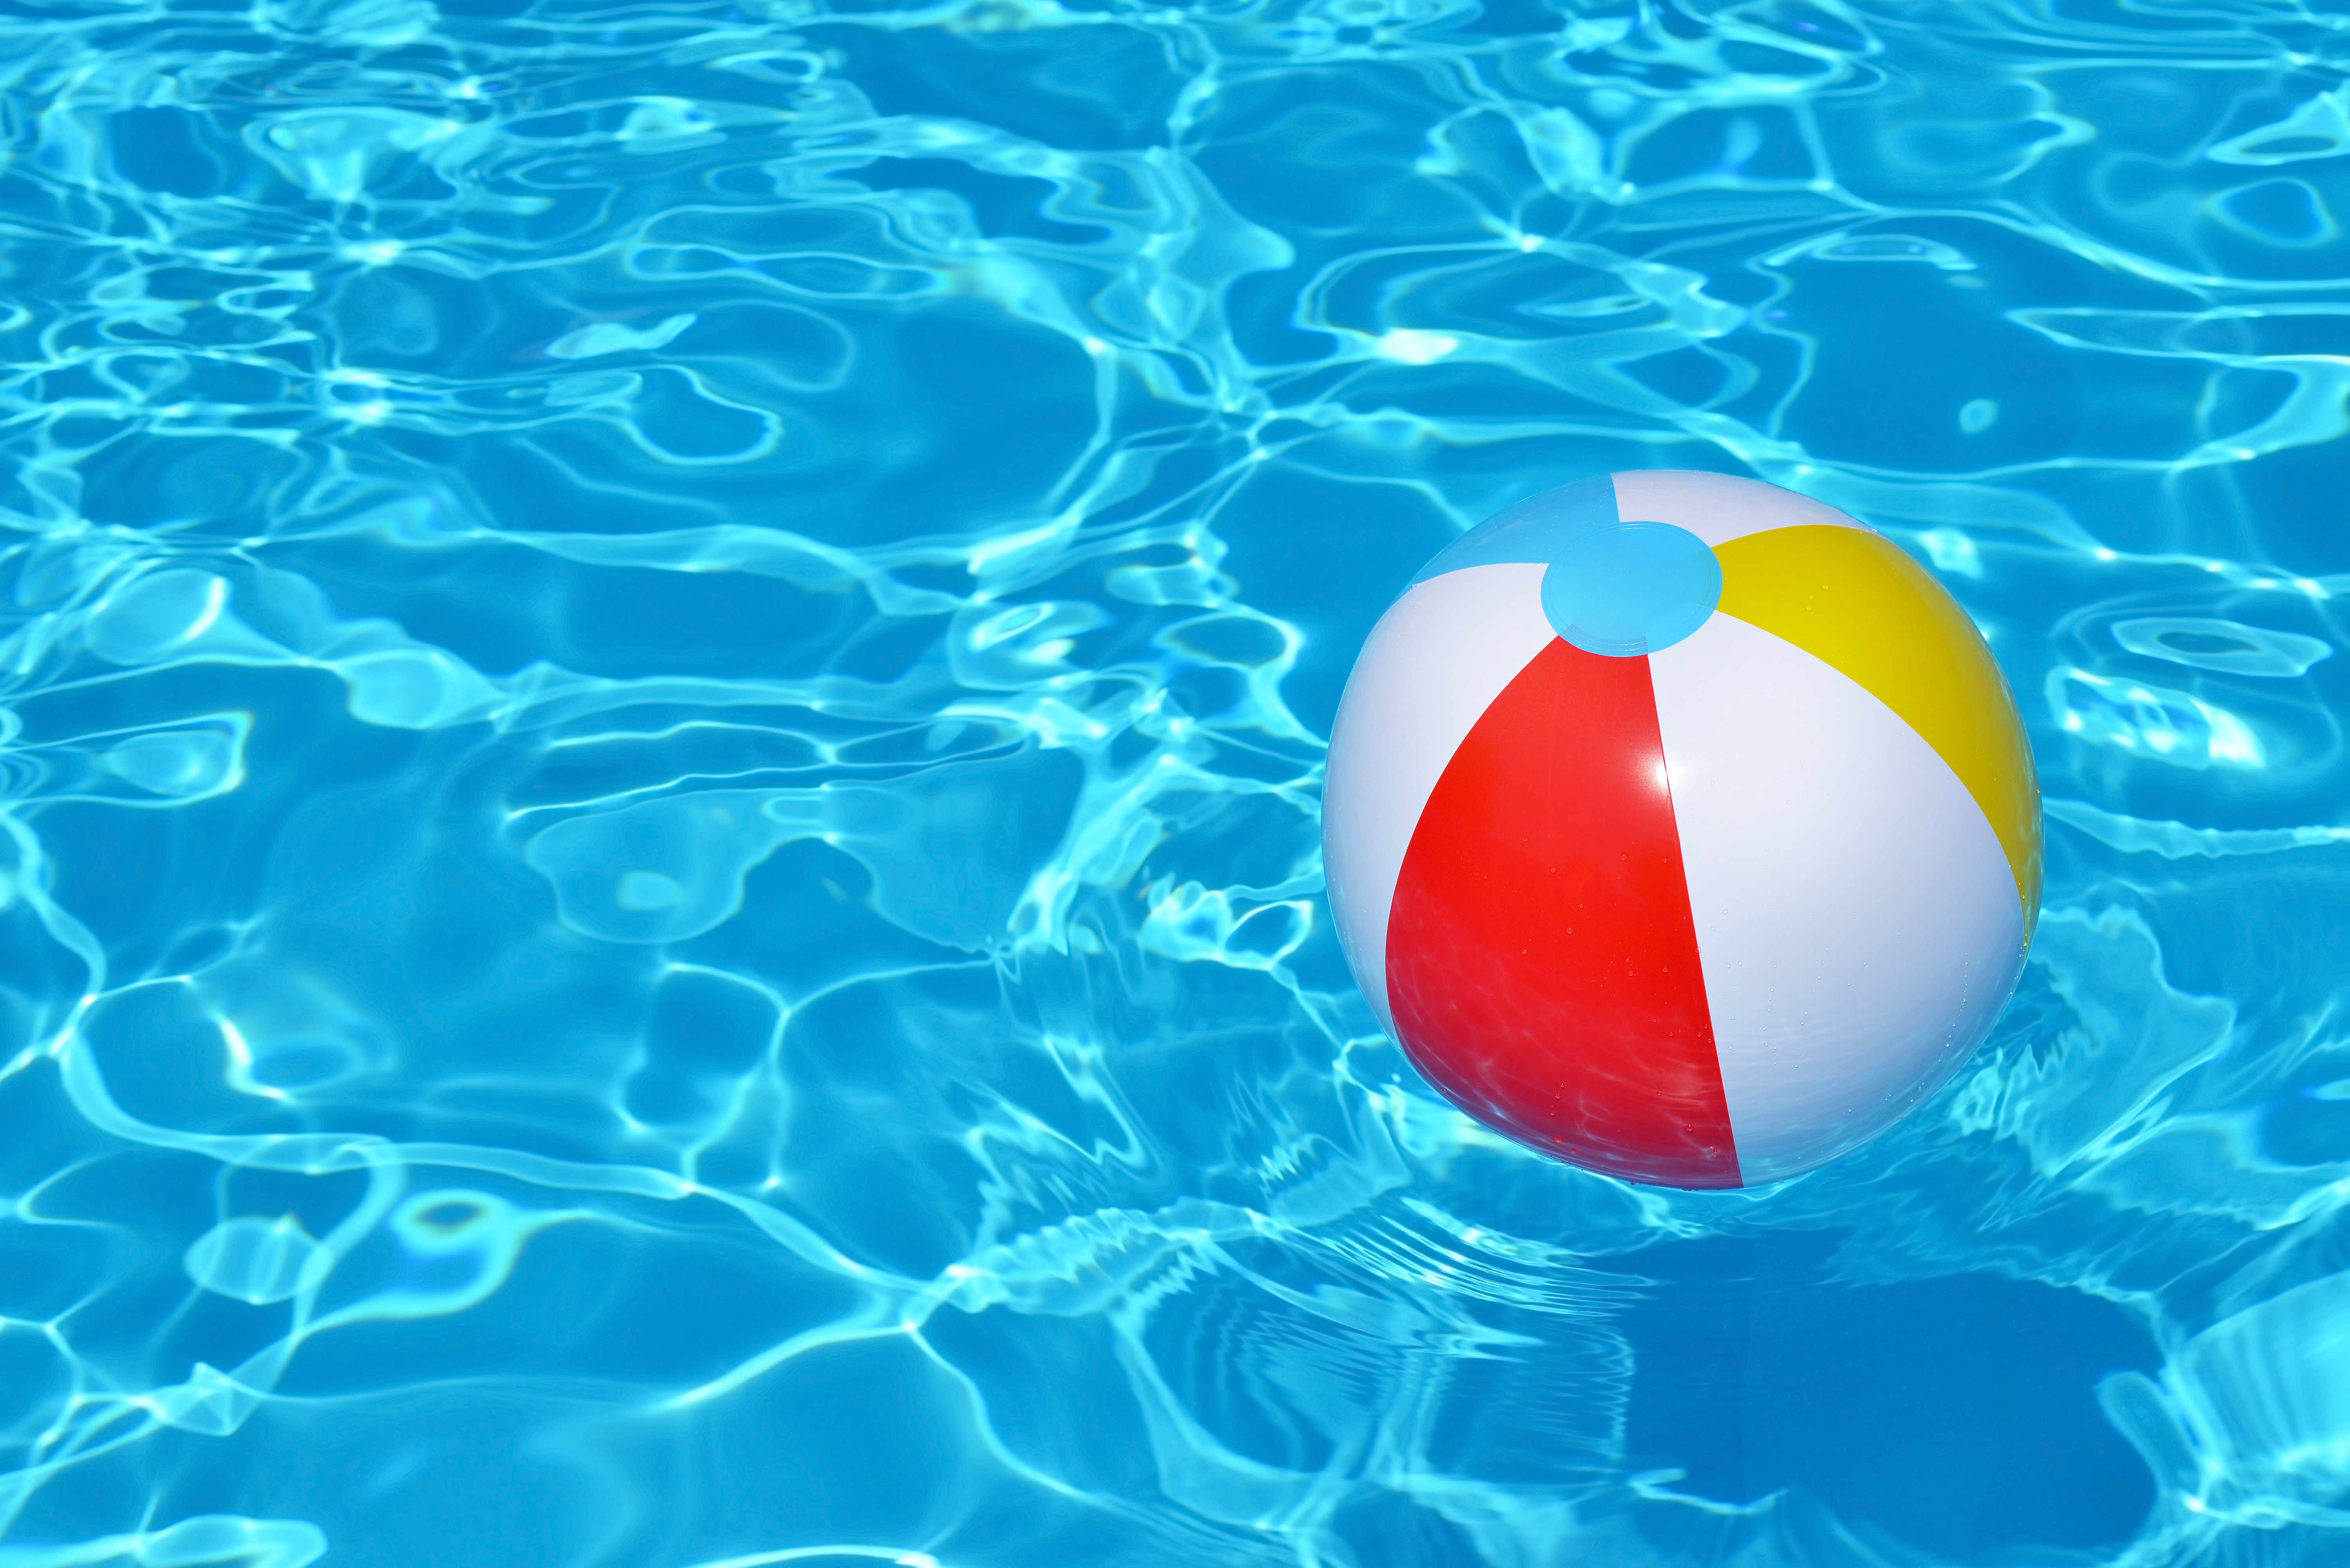 A brighly colored beac ball floating in a vibrantly blue pool